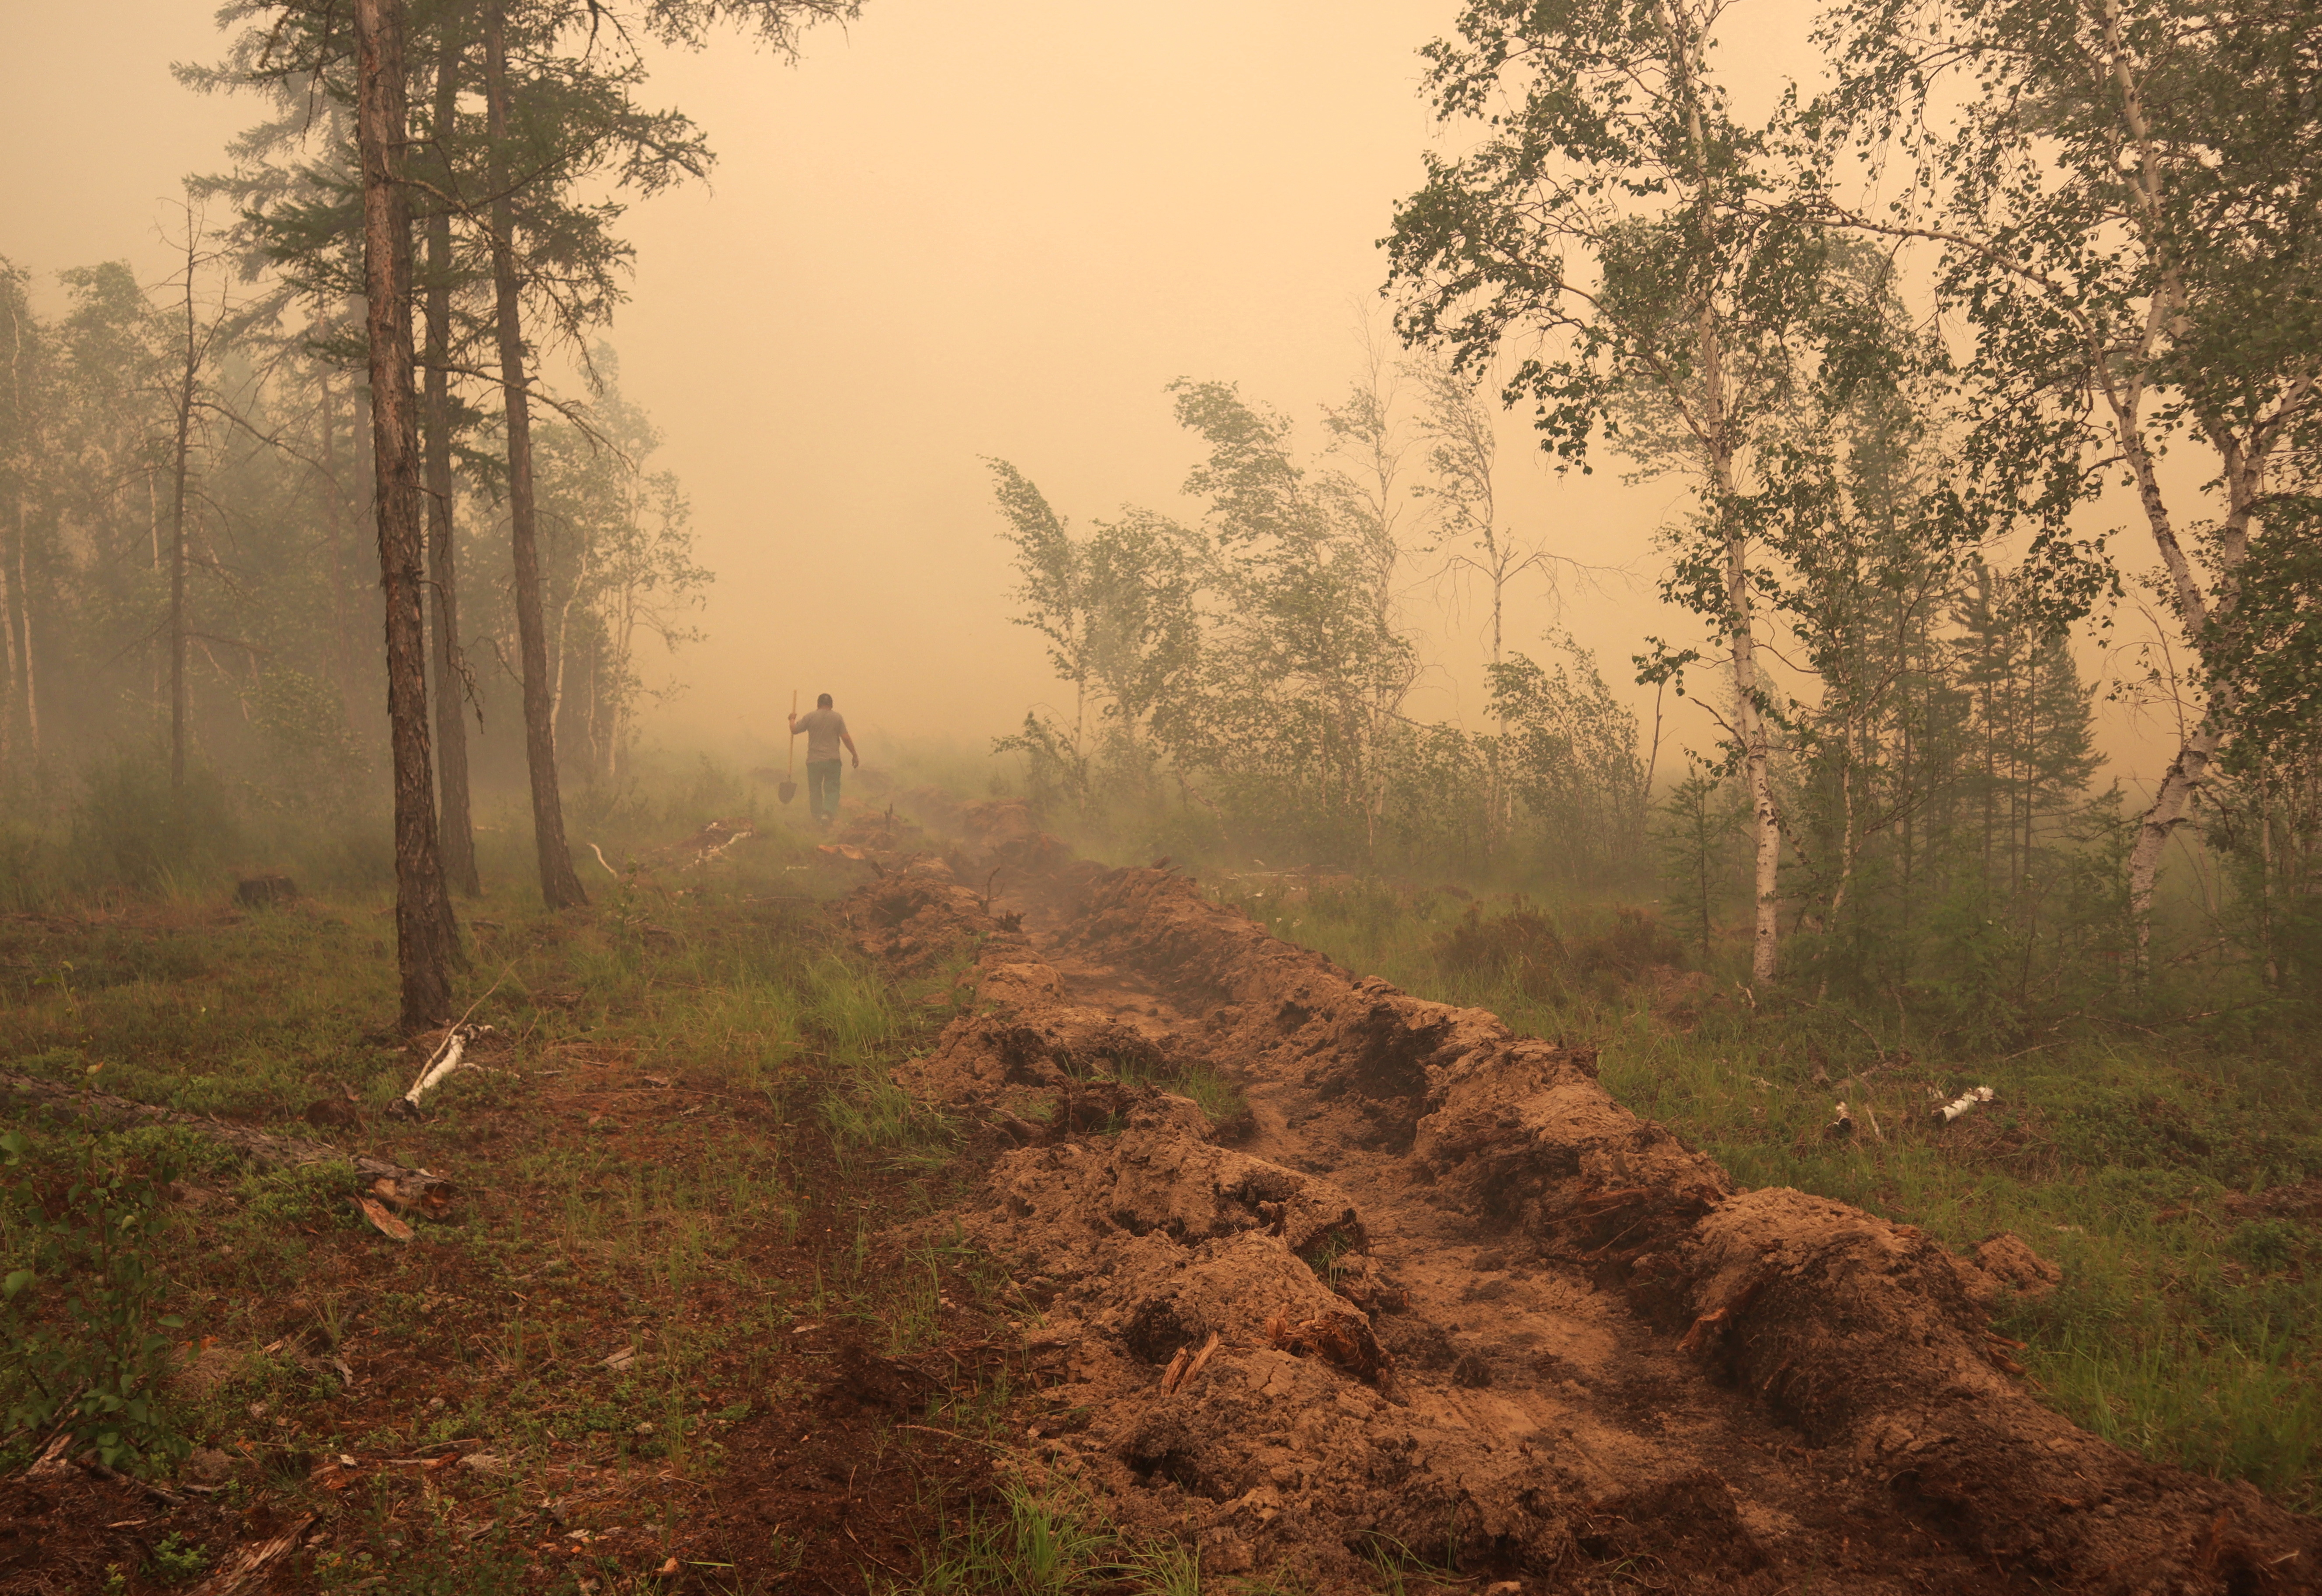 A man digs a control line during the work on extinguishing a forest fire in Yakutia